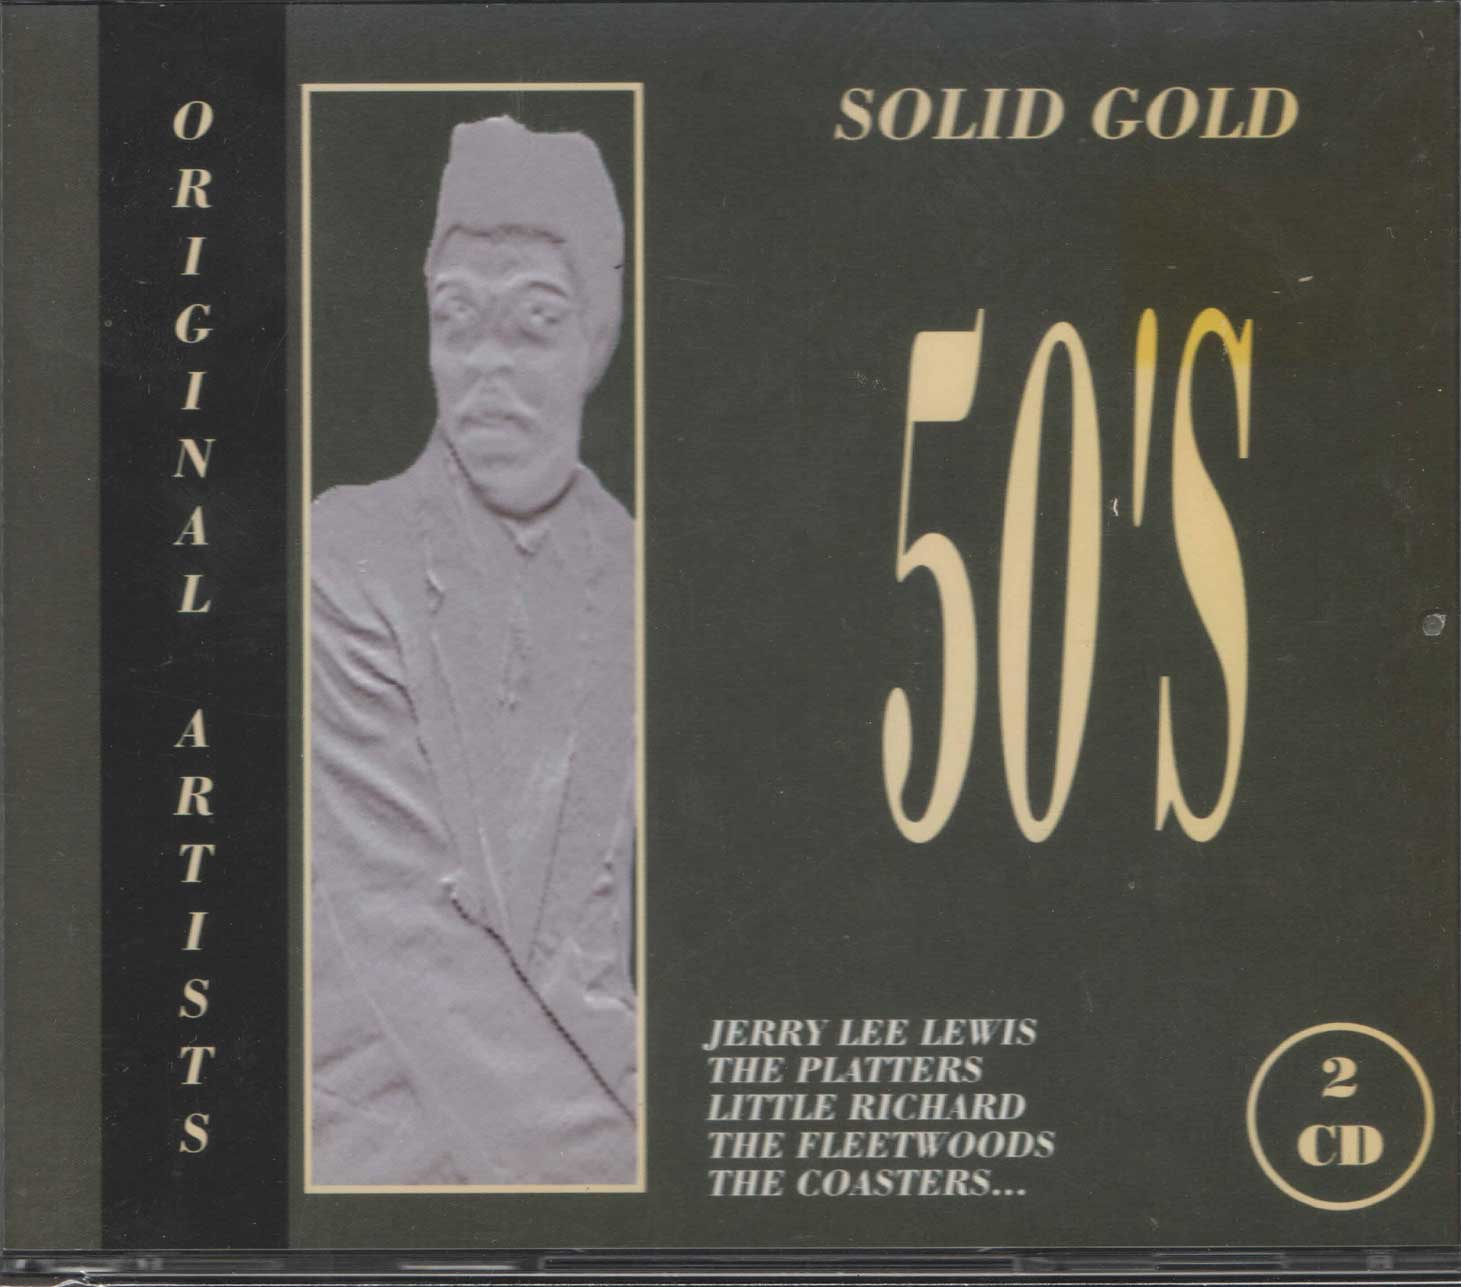 SOLID GOLD 50s